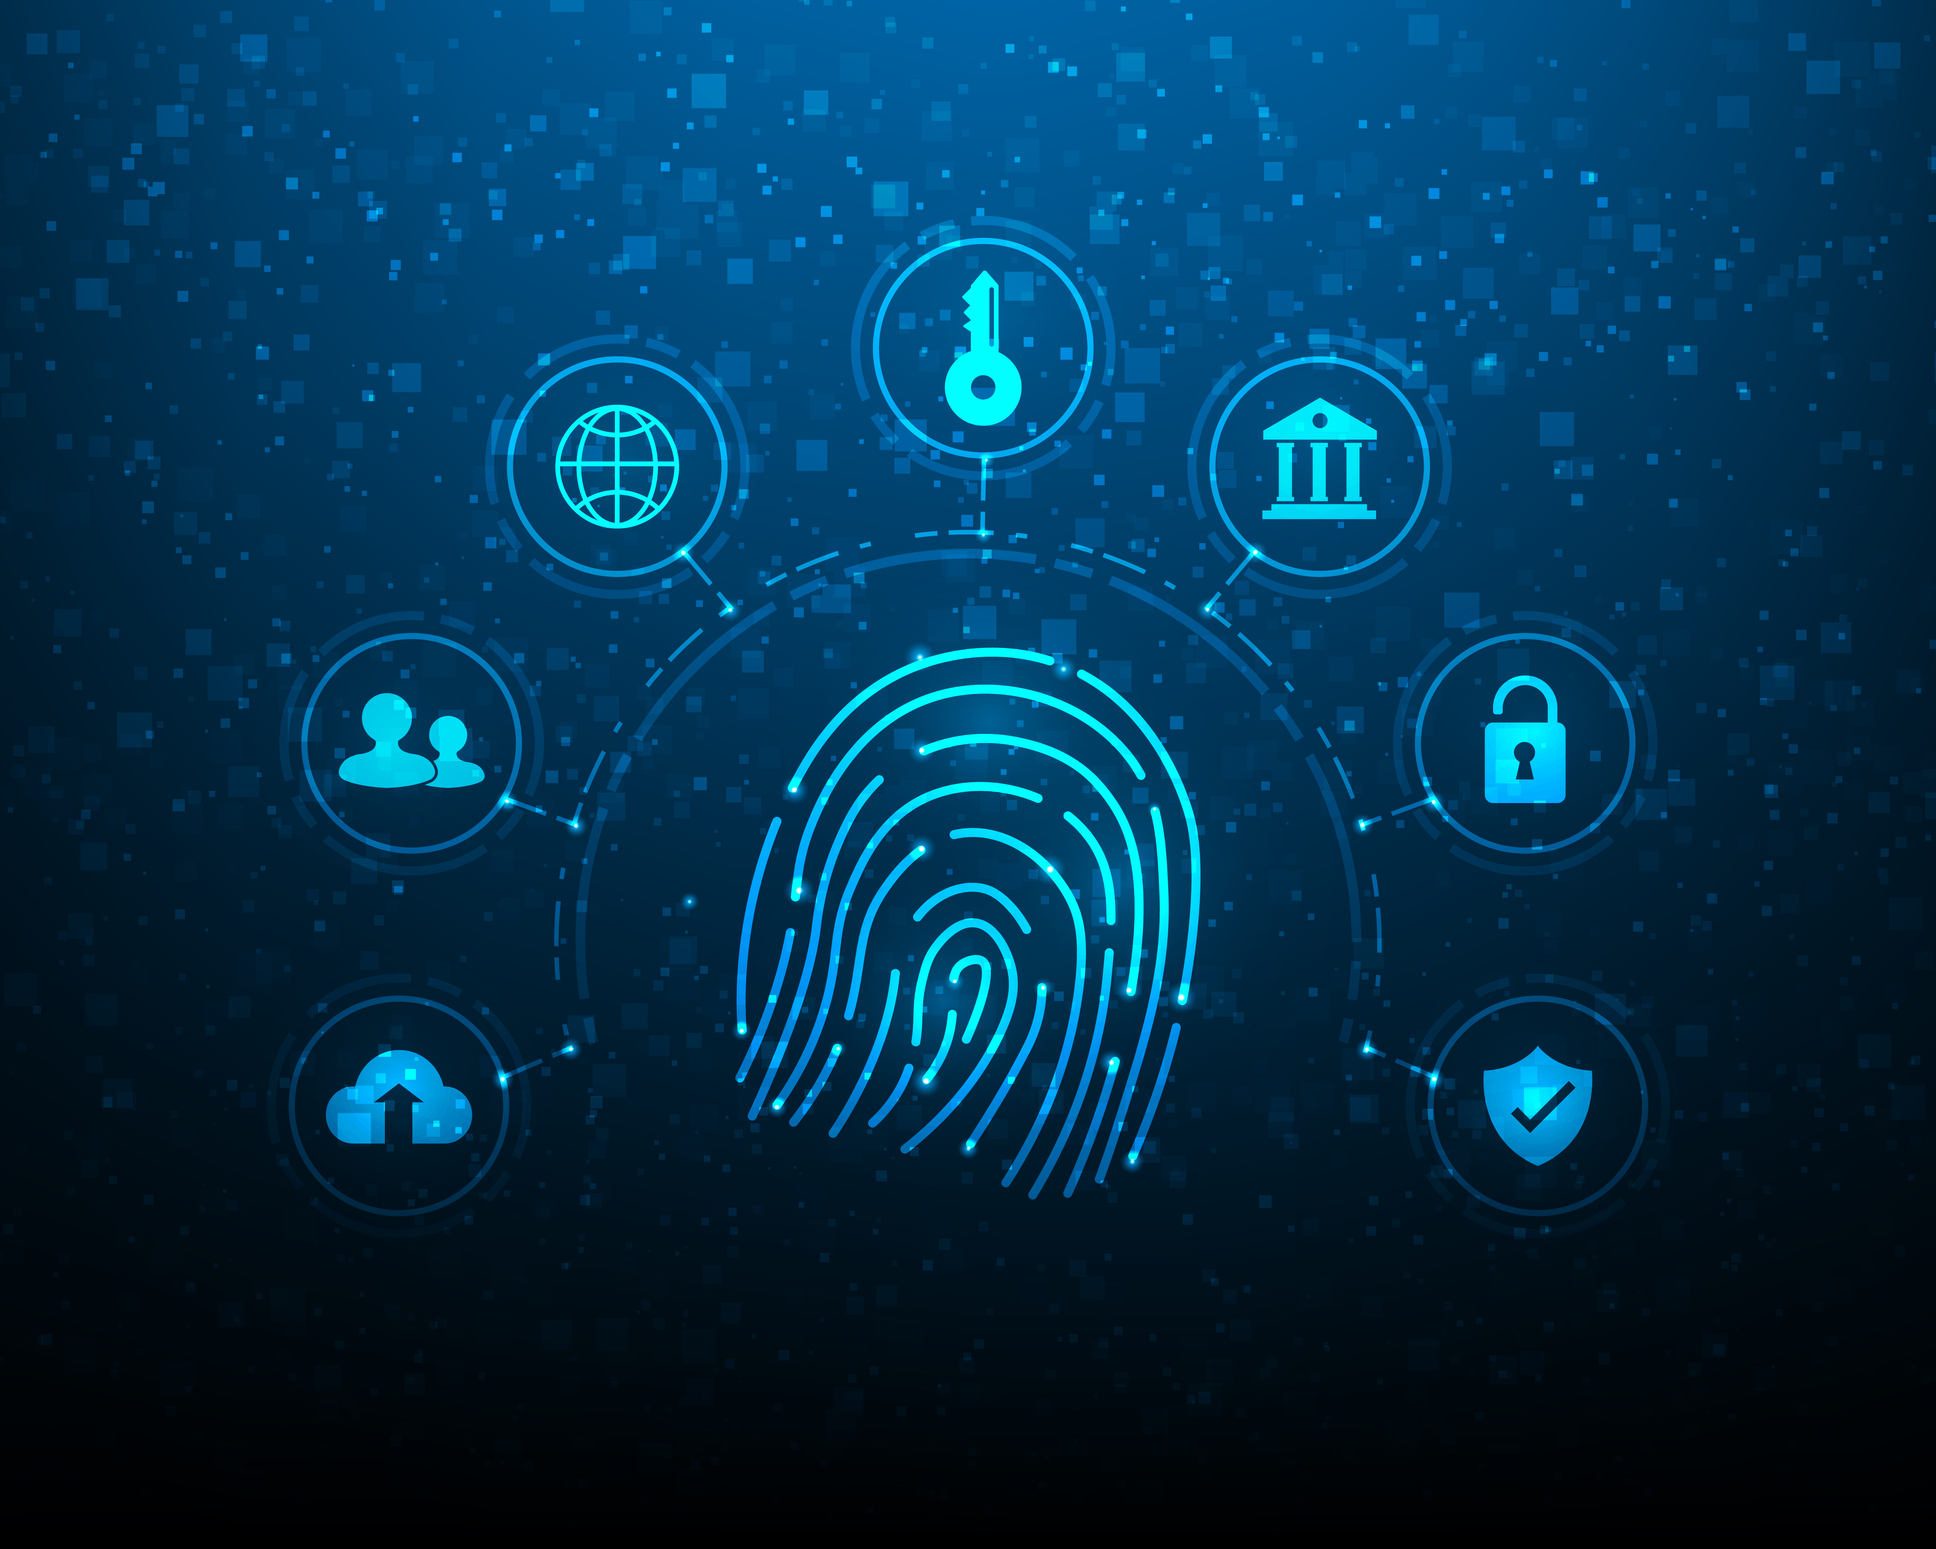 fingerprint cyber security technology digital on blue background. electronic key and code safety icon cyber. information privacy padlock. vector illustration fantastic technology design.